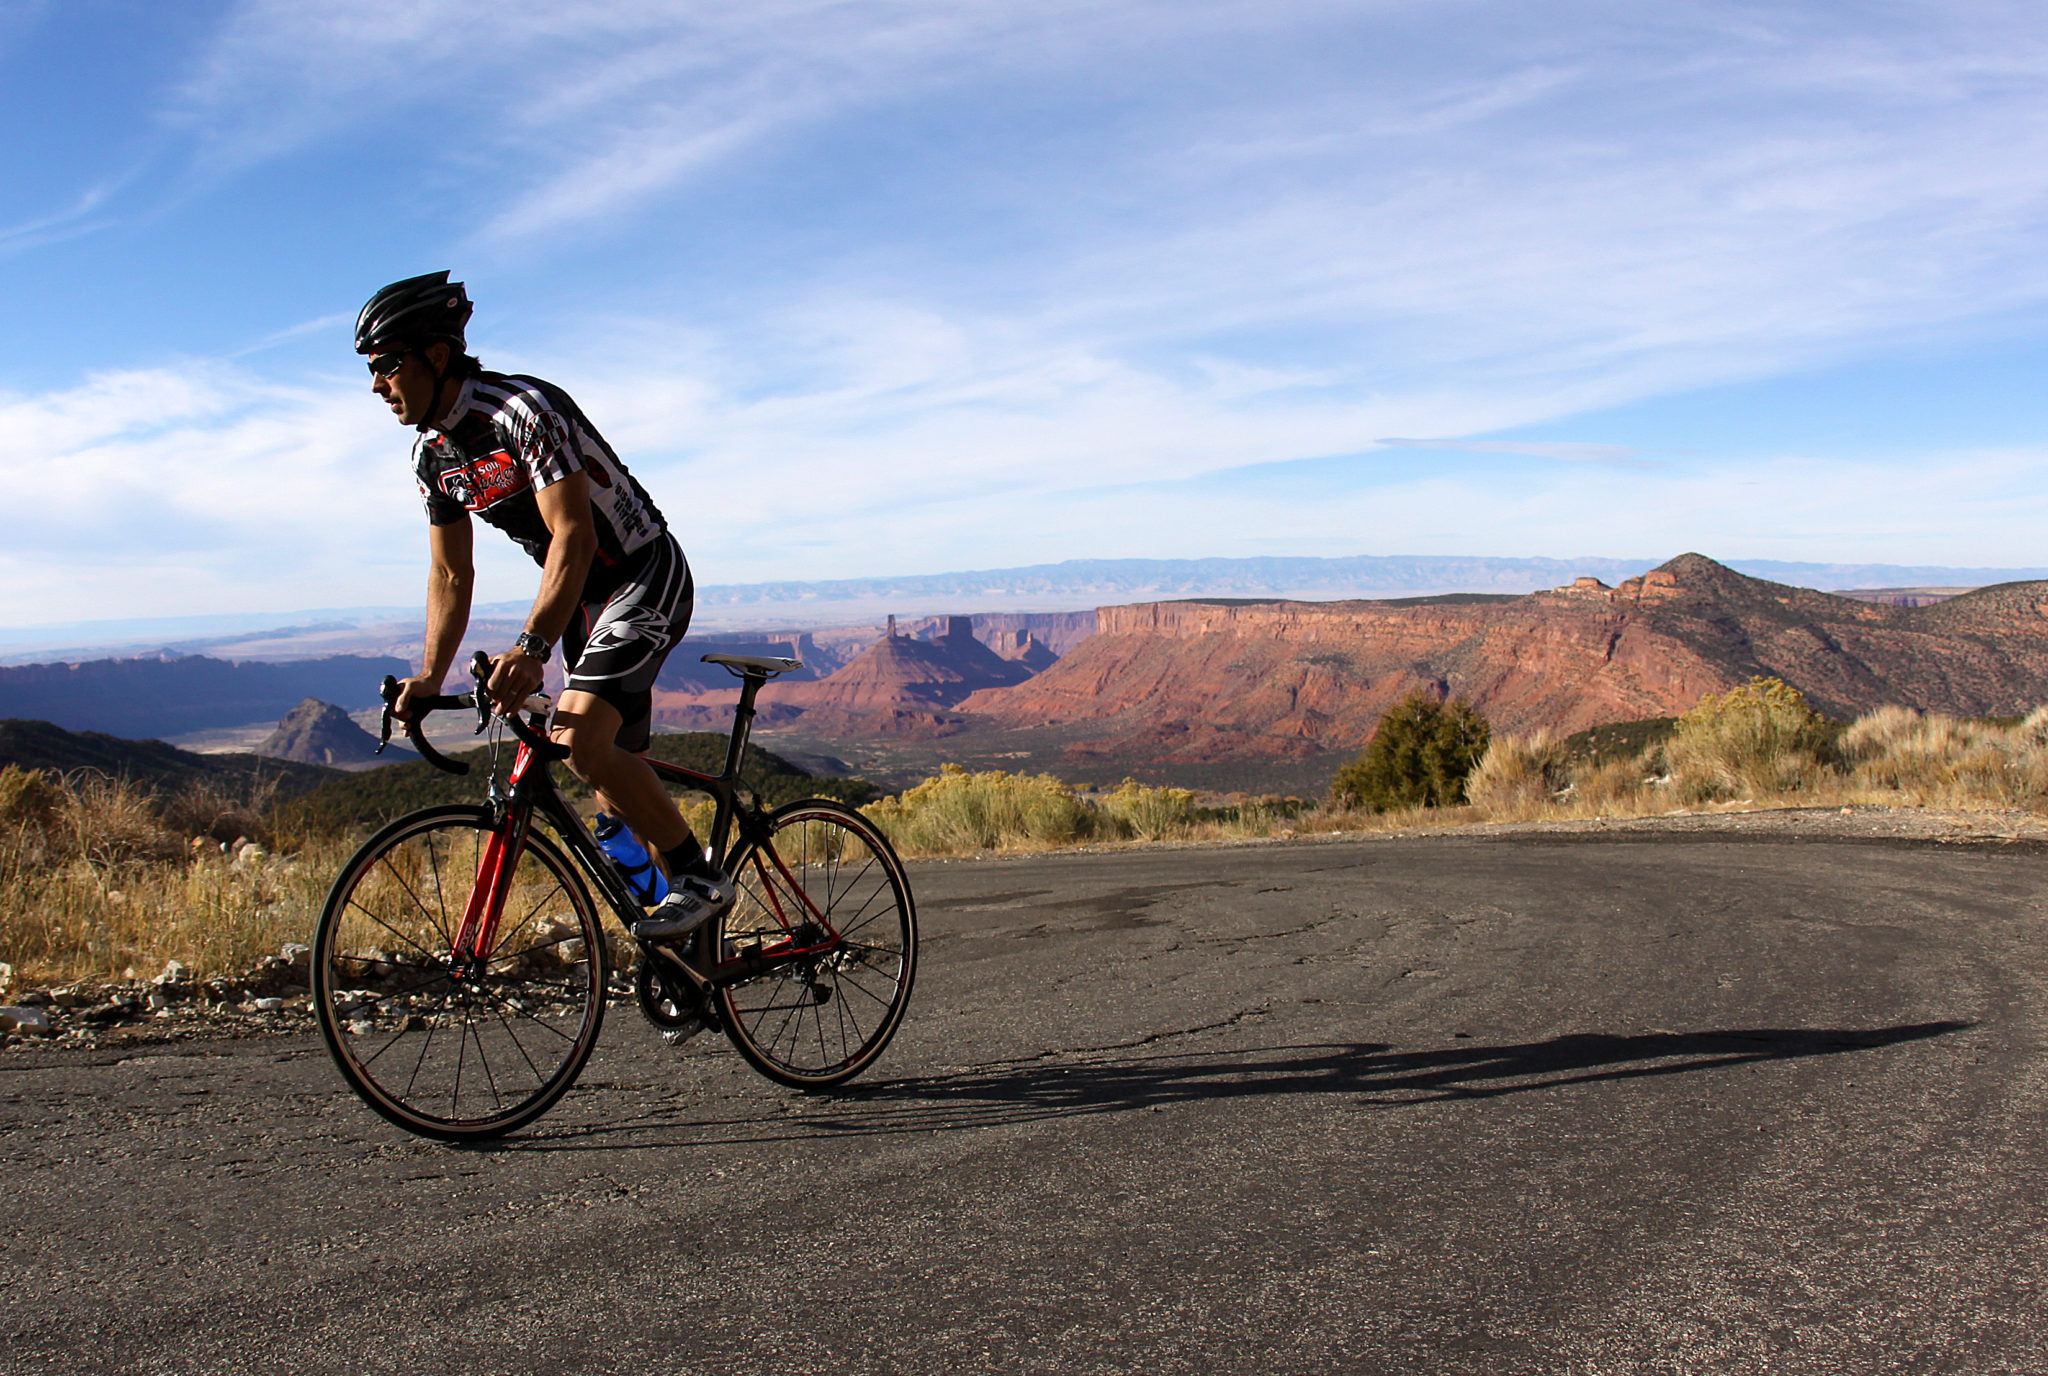 A person riding a bike up a curve in a paved road high above red rock formations.